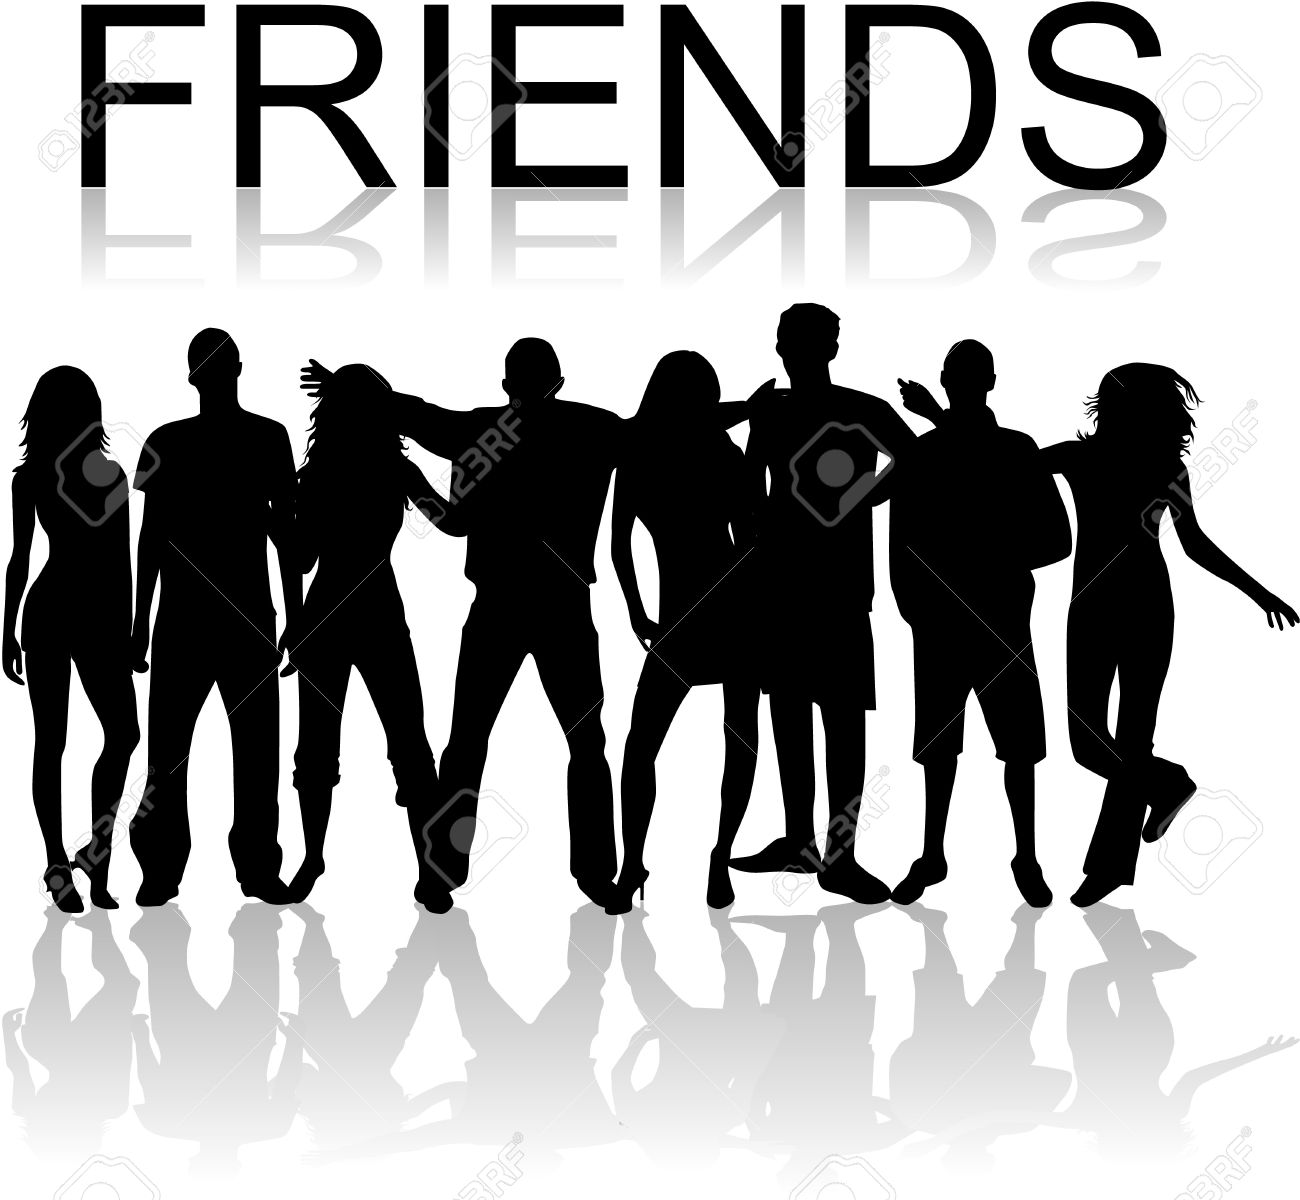 Friends silhouette free clipart